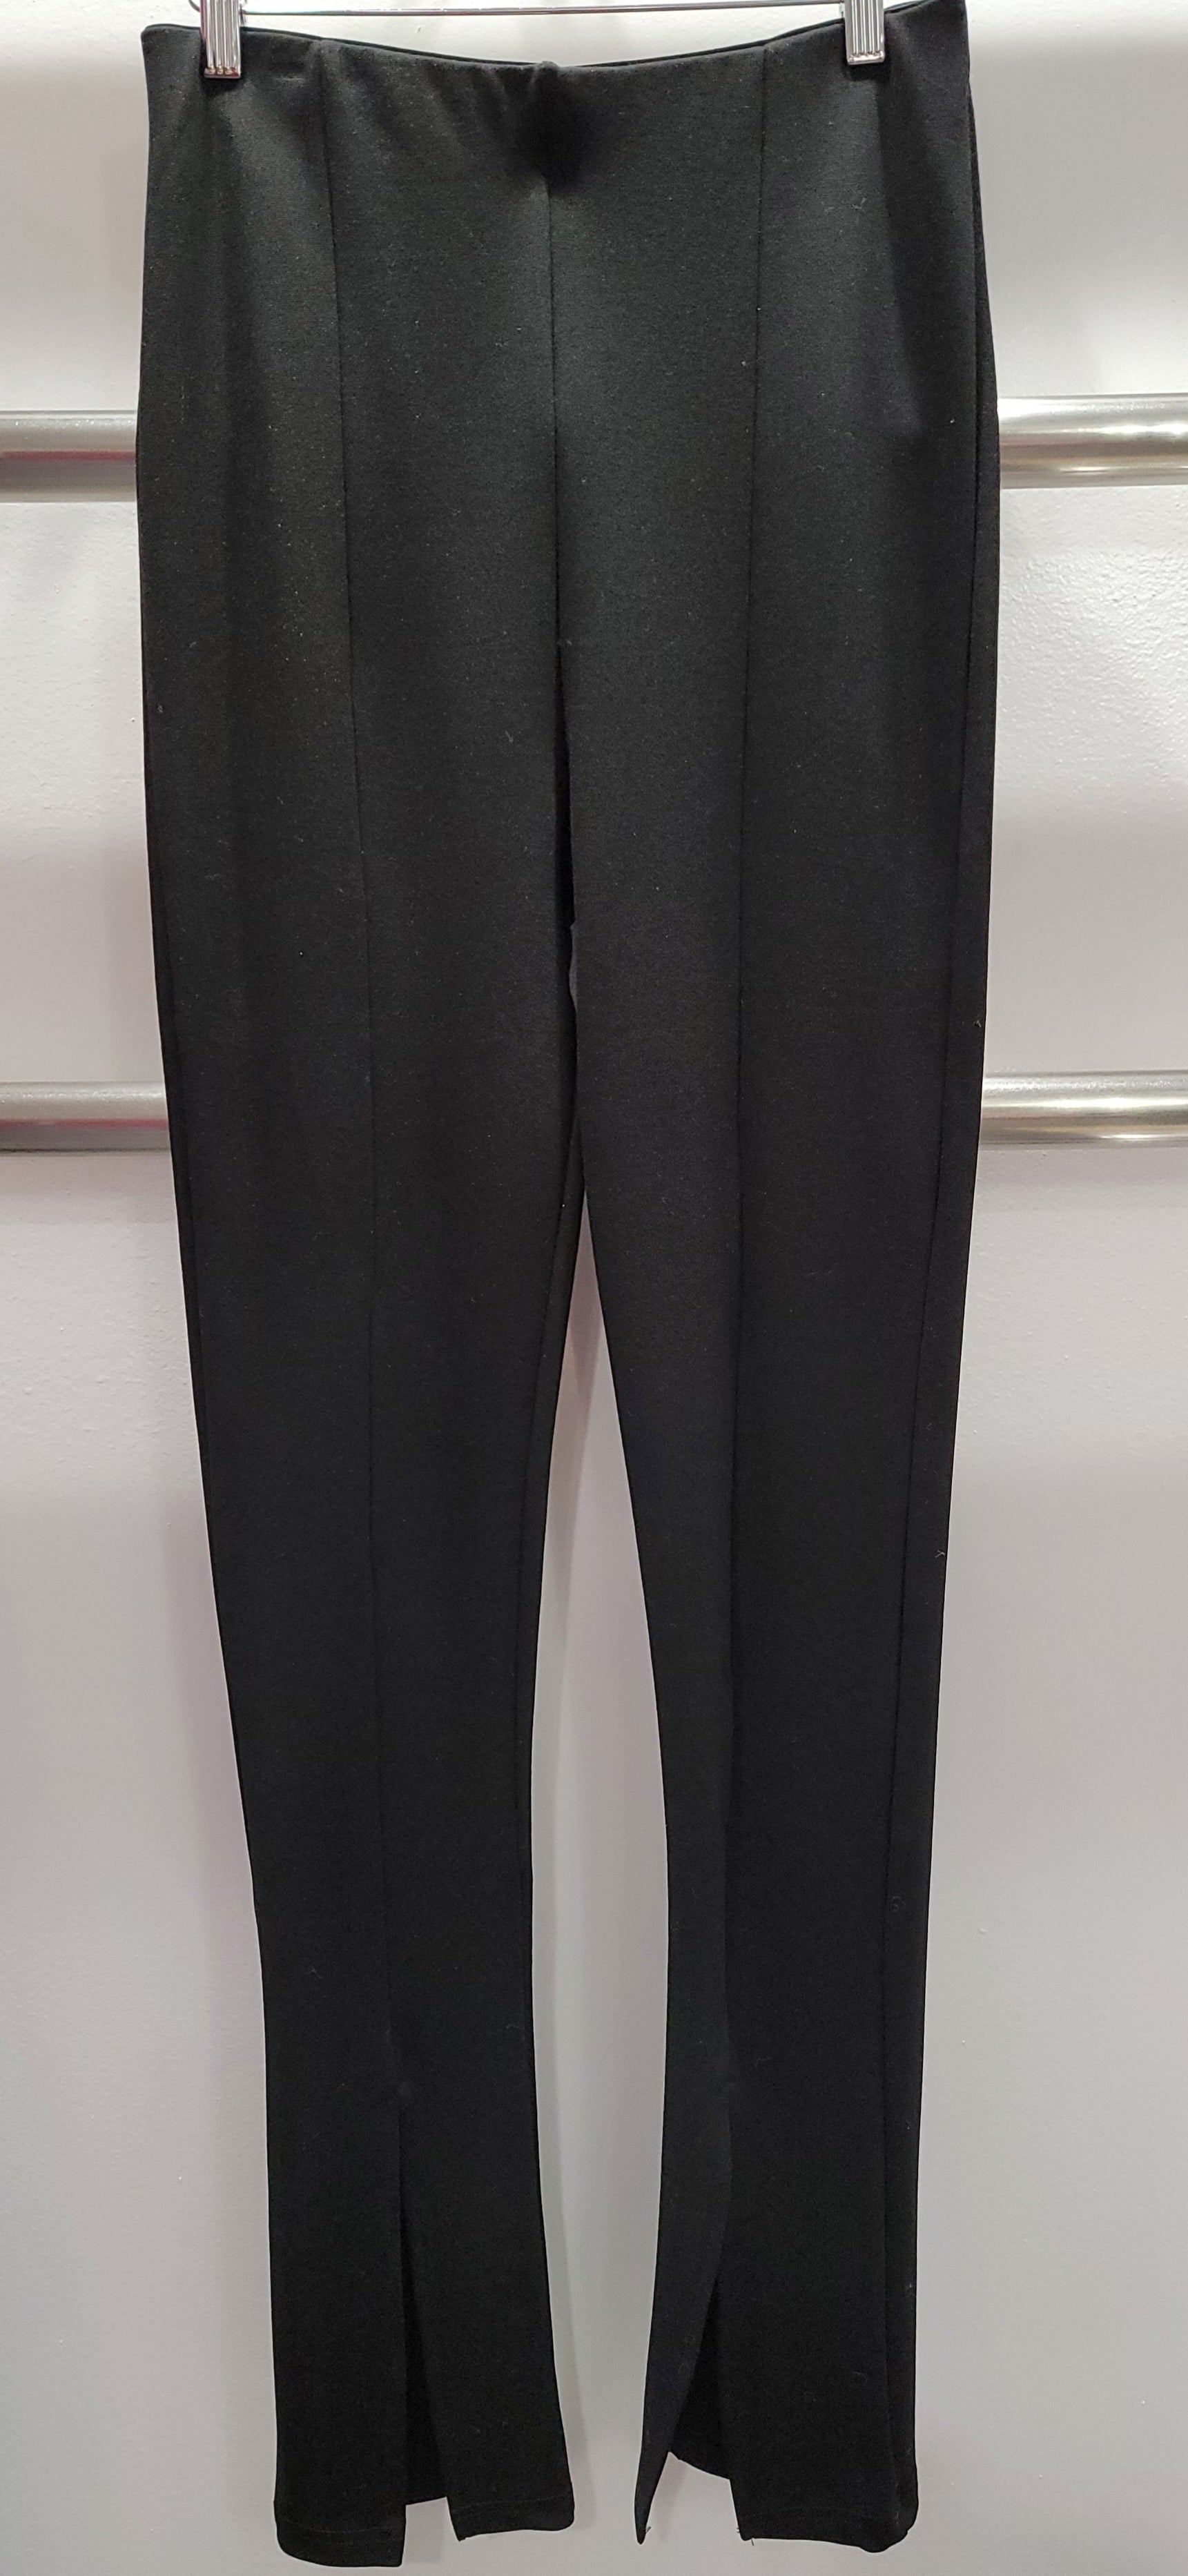 Weezie D. stretch pull up exaggerated high waist black leggings have an ankle slit front detail that make our leggings extra fabulous to wear. Elastic waist for comfort, stylish with dart front details for a seamless silhouette. Wear with tops, blazers, & even a fun t-shirt. 95% Polyester 5% Elastane offers a nice stretch fabric for our curvy women. 